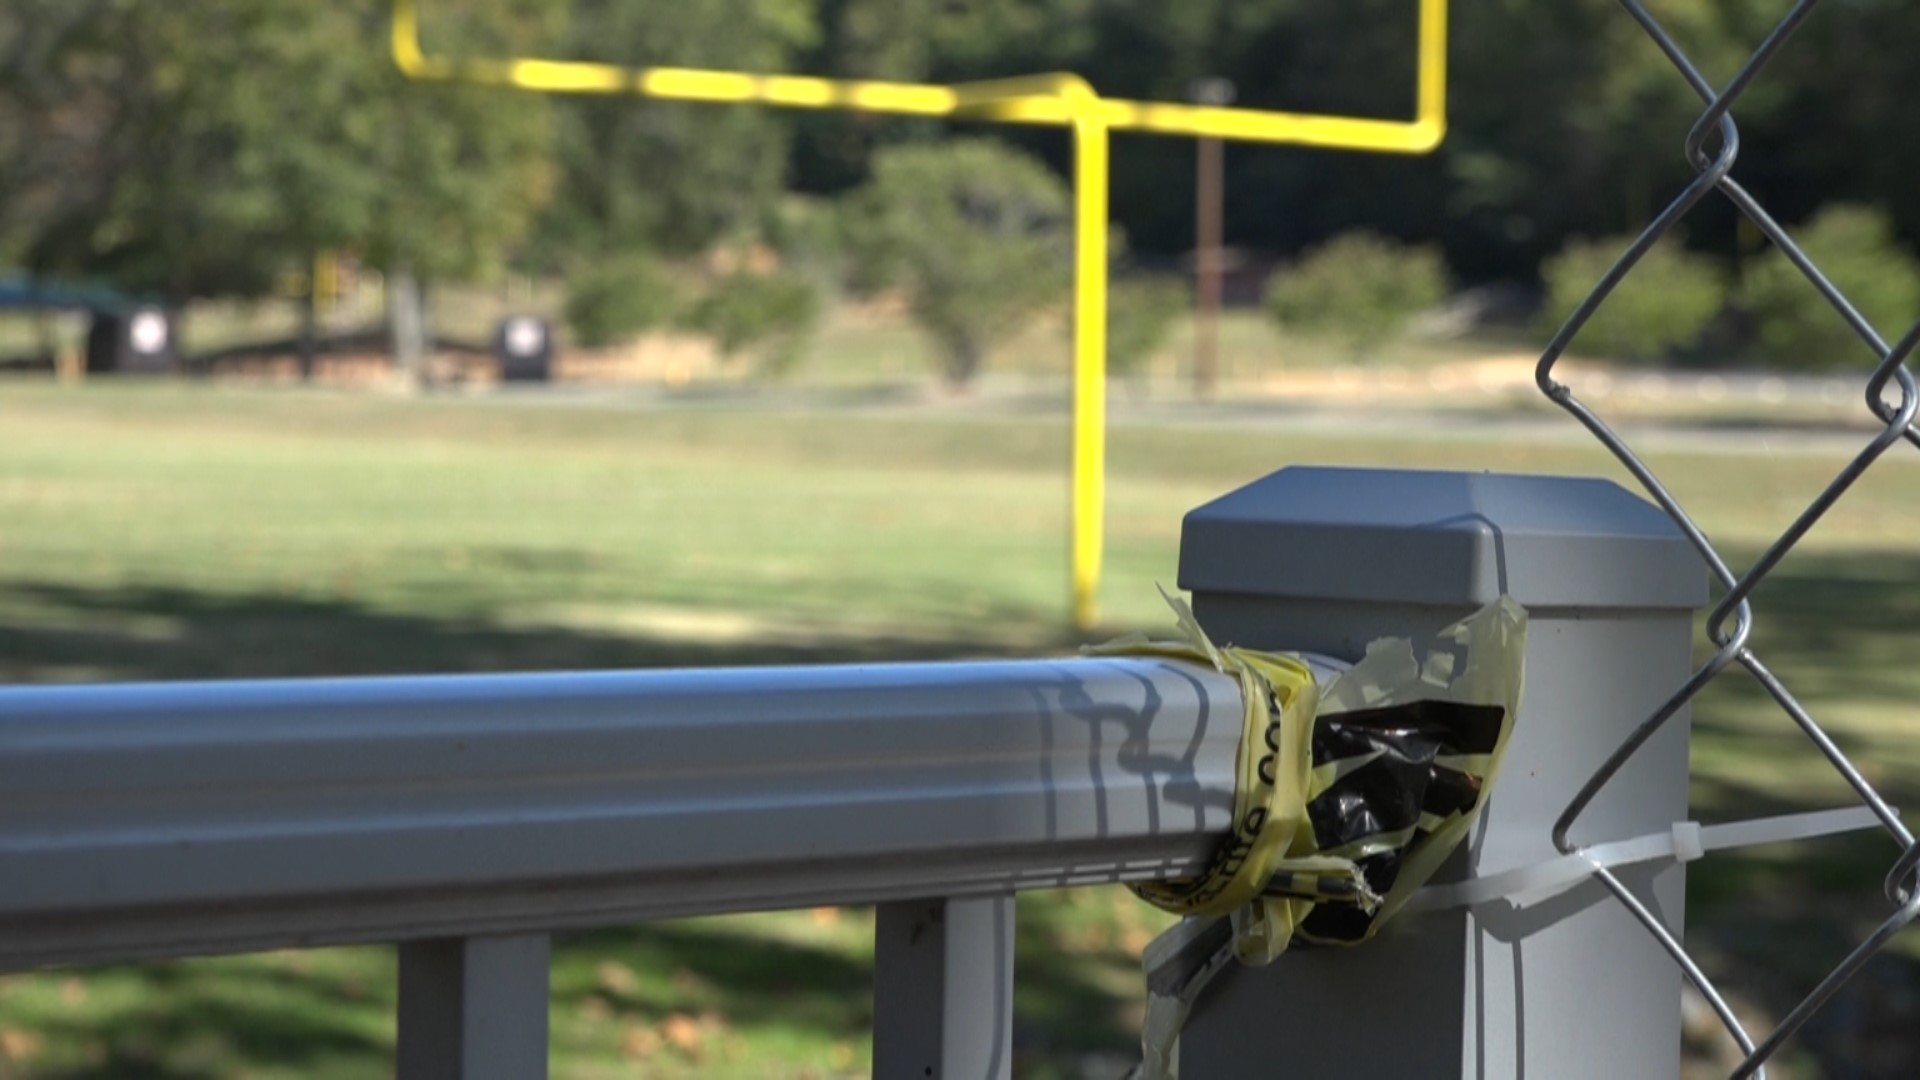 Youth football team interrupted by shootings in Durham, searching for safe  field to play